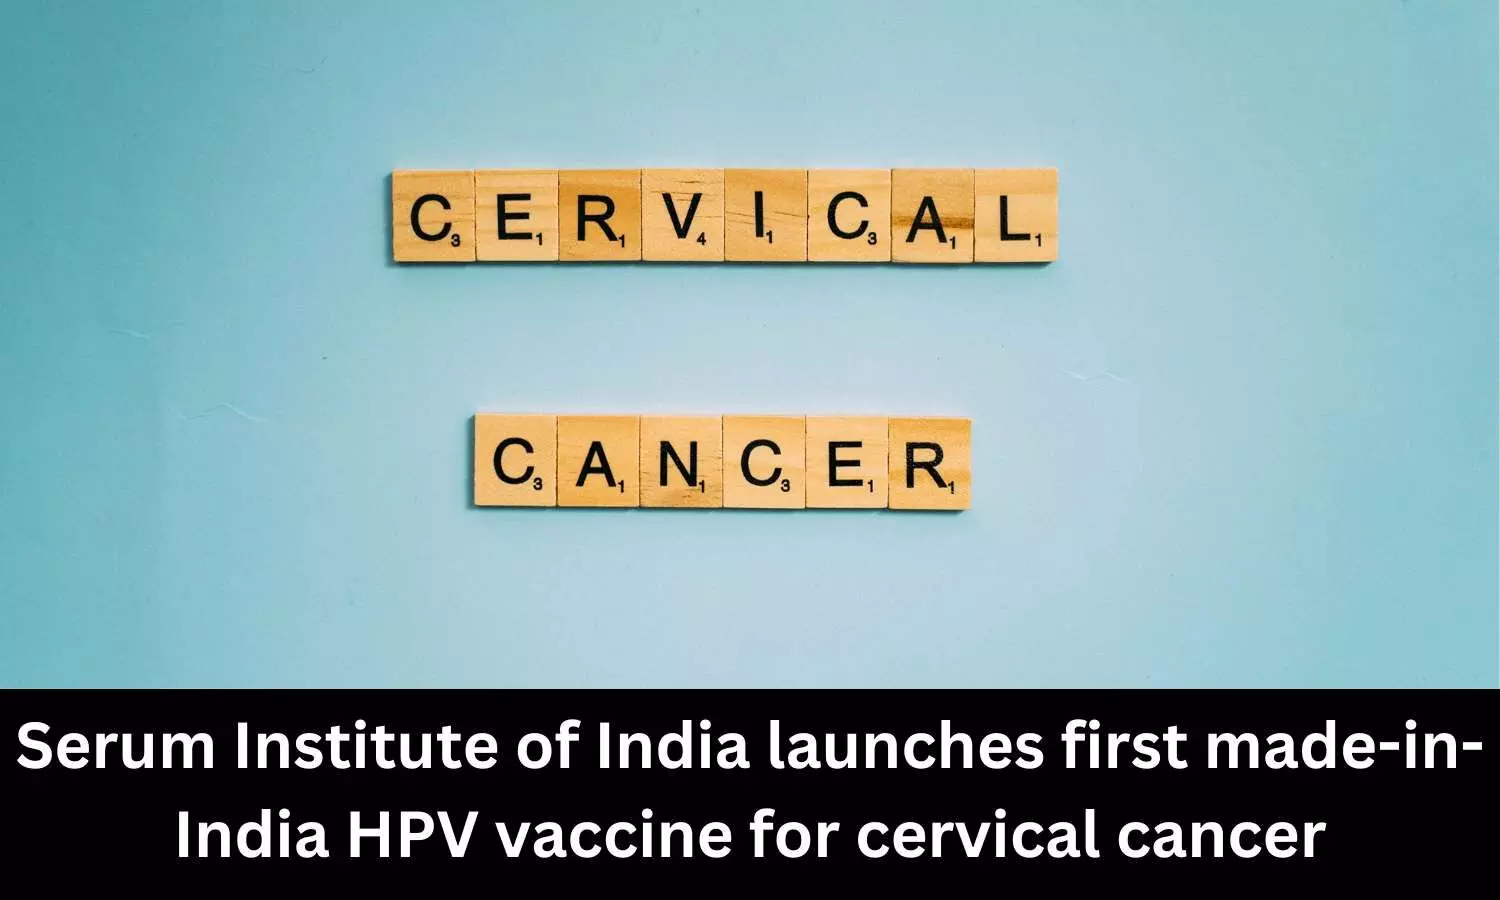 Serum Institute of India unveils first made-in-India HPV vaccine for cervical cancer